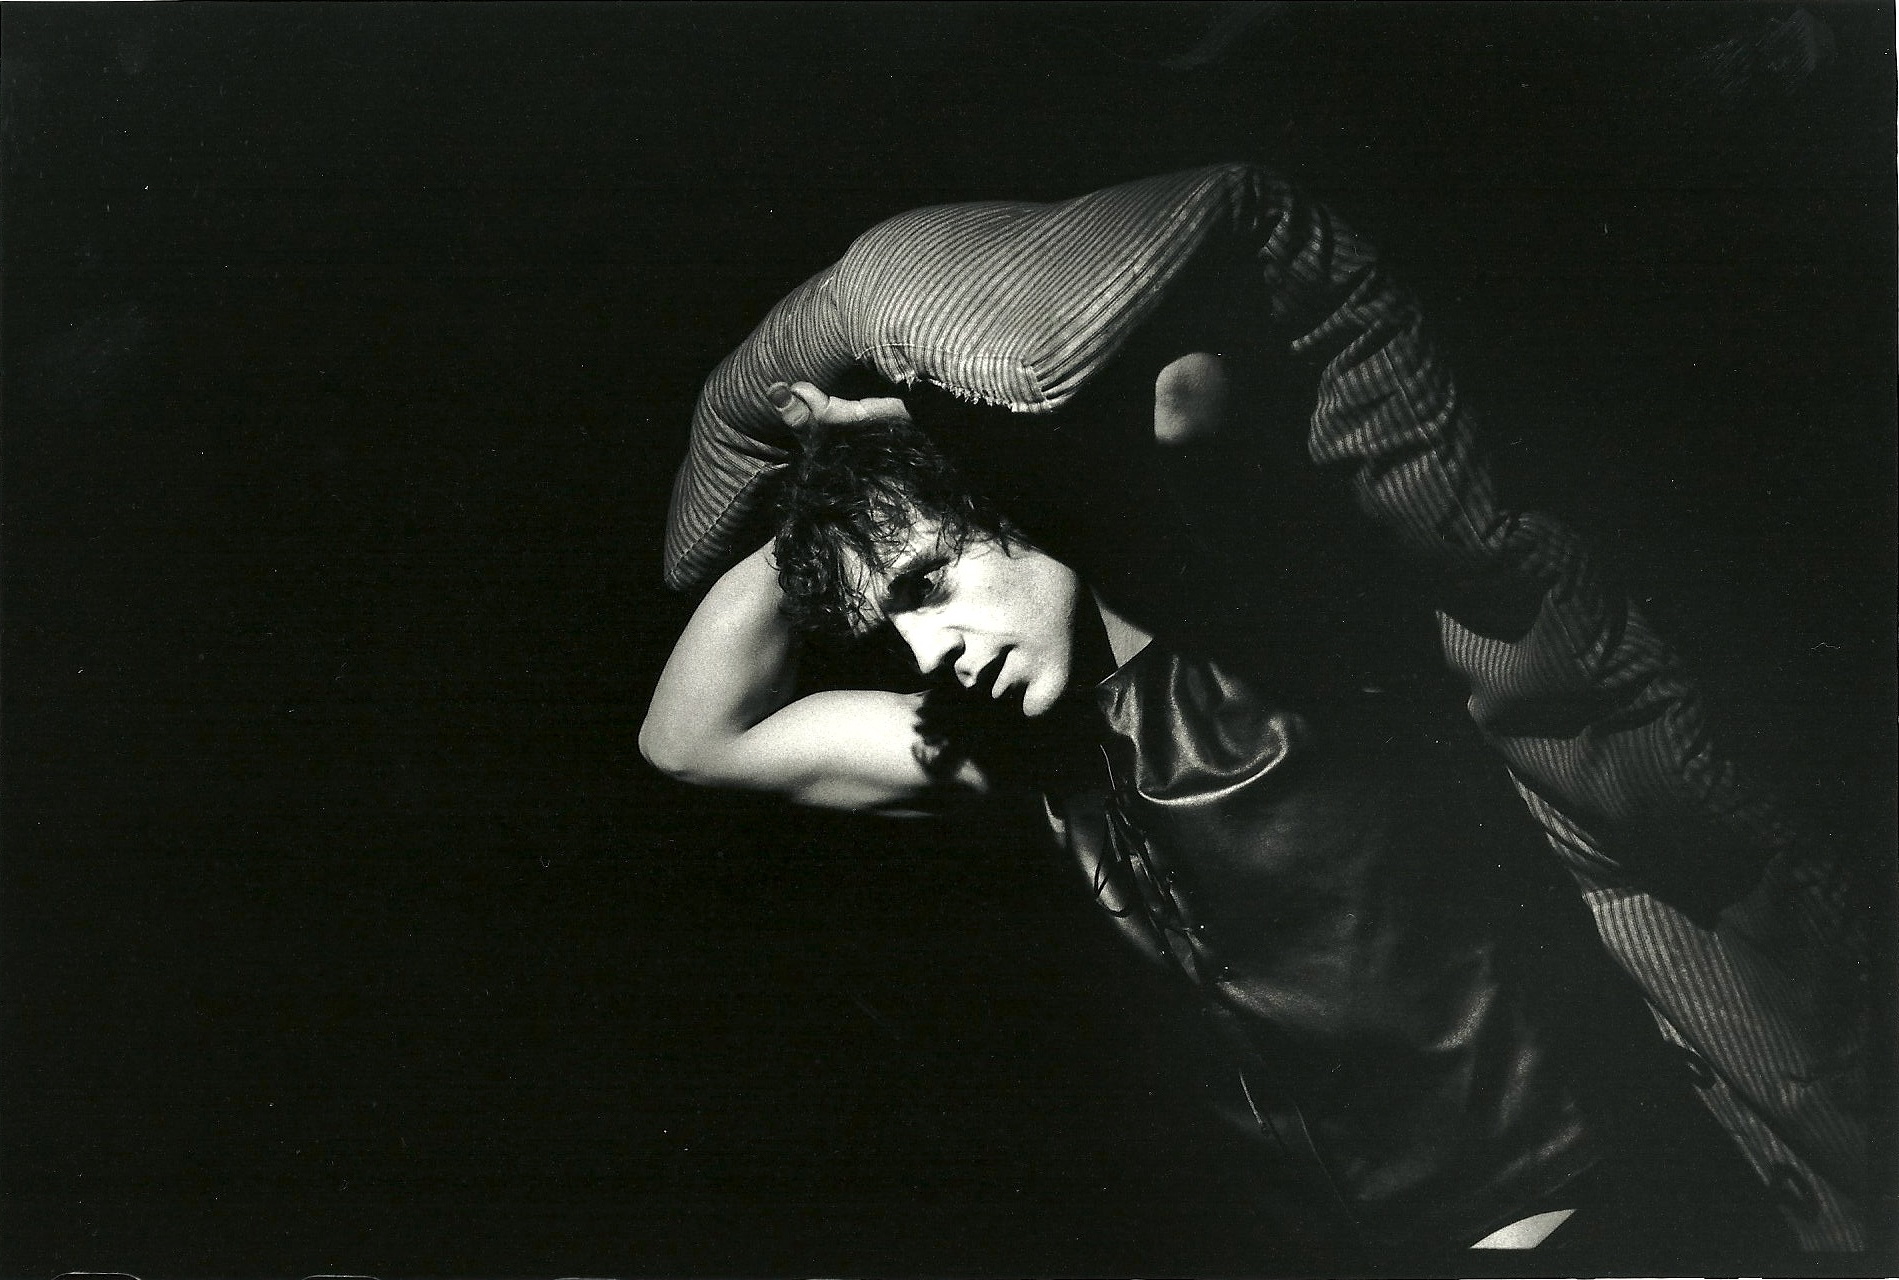 As Lightborne in 'Edward II' at The Sheffield Crucible Theatre in 2001